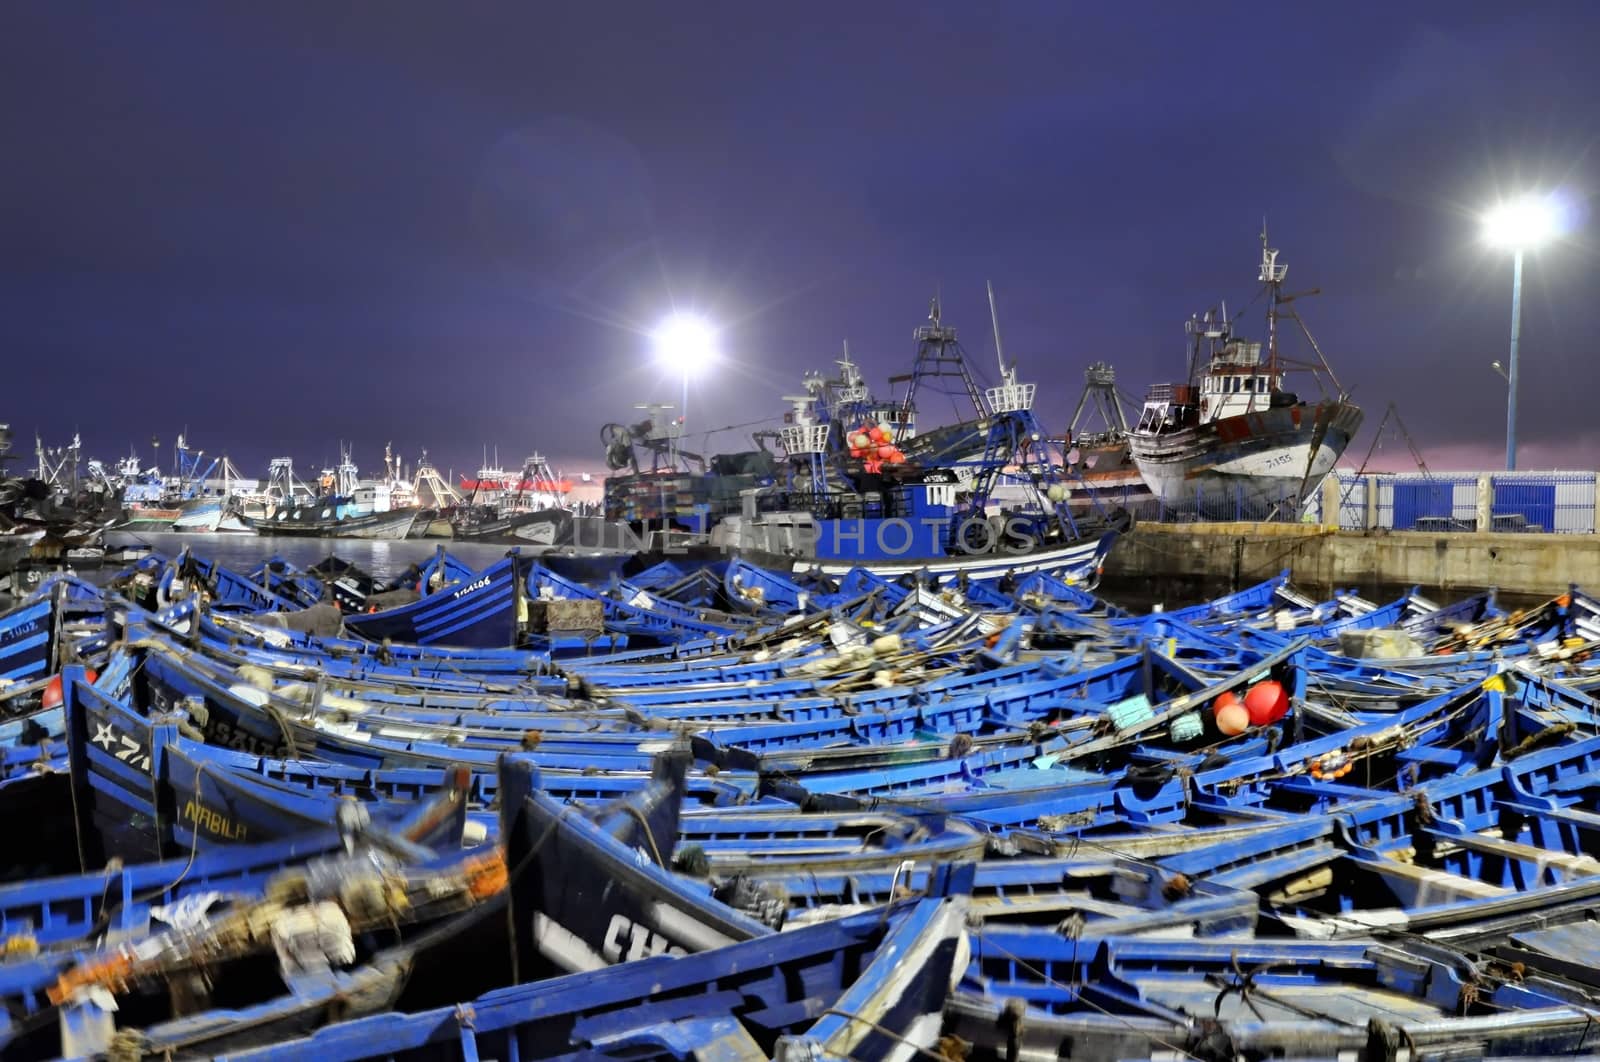 Blue fishing boats of Essaouira at night by anderm